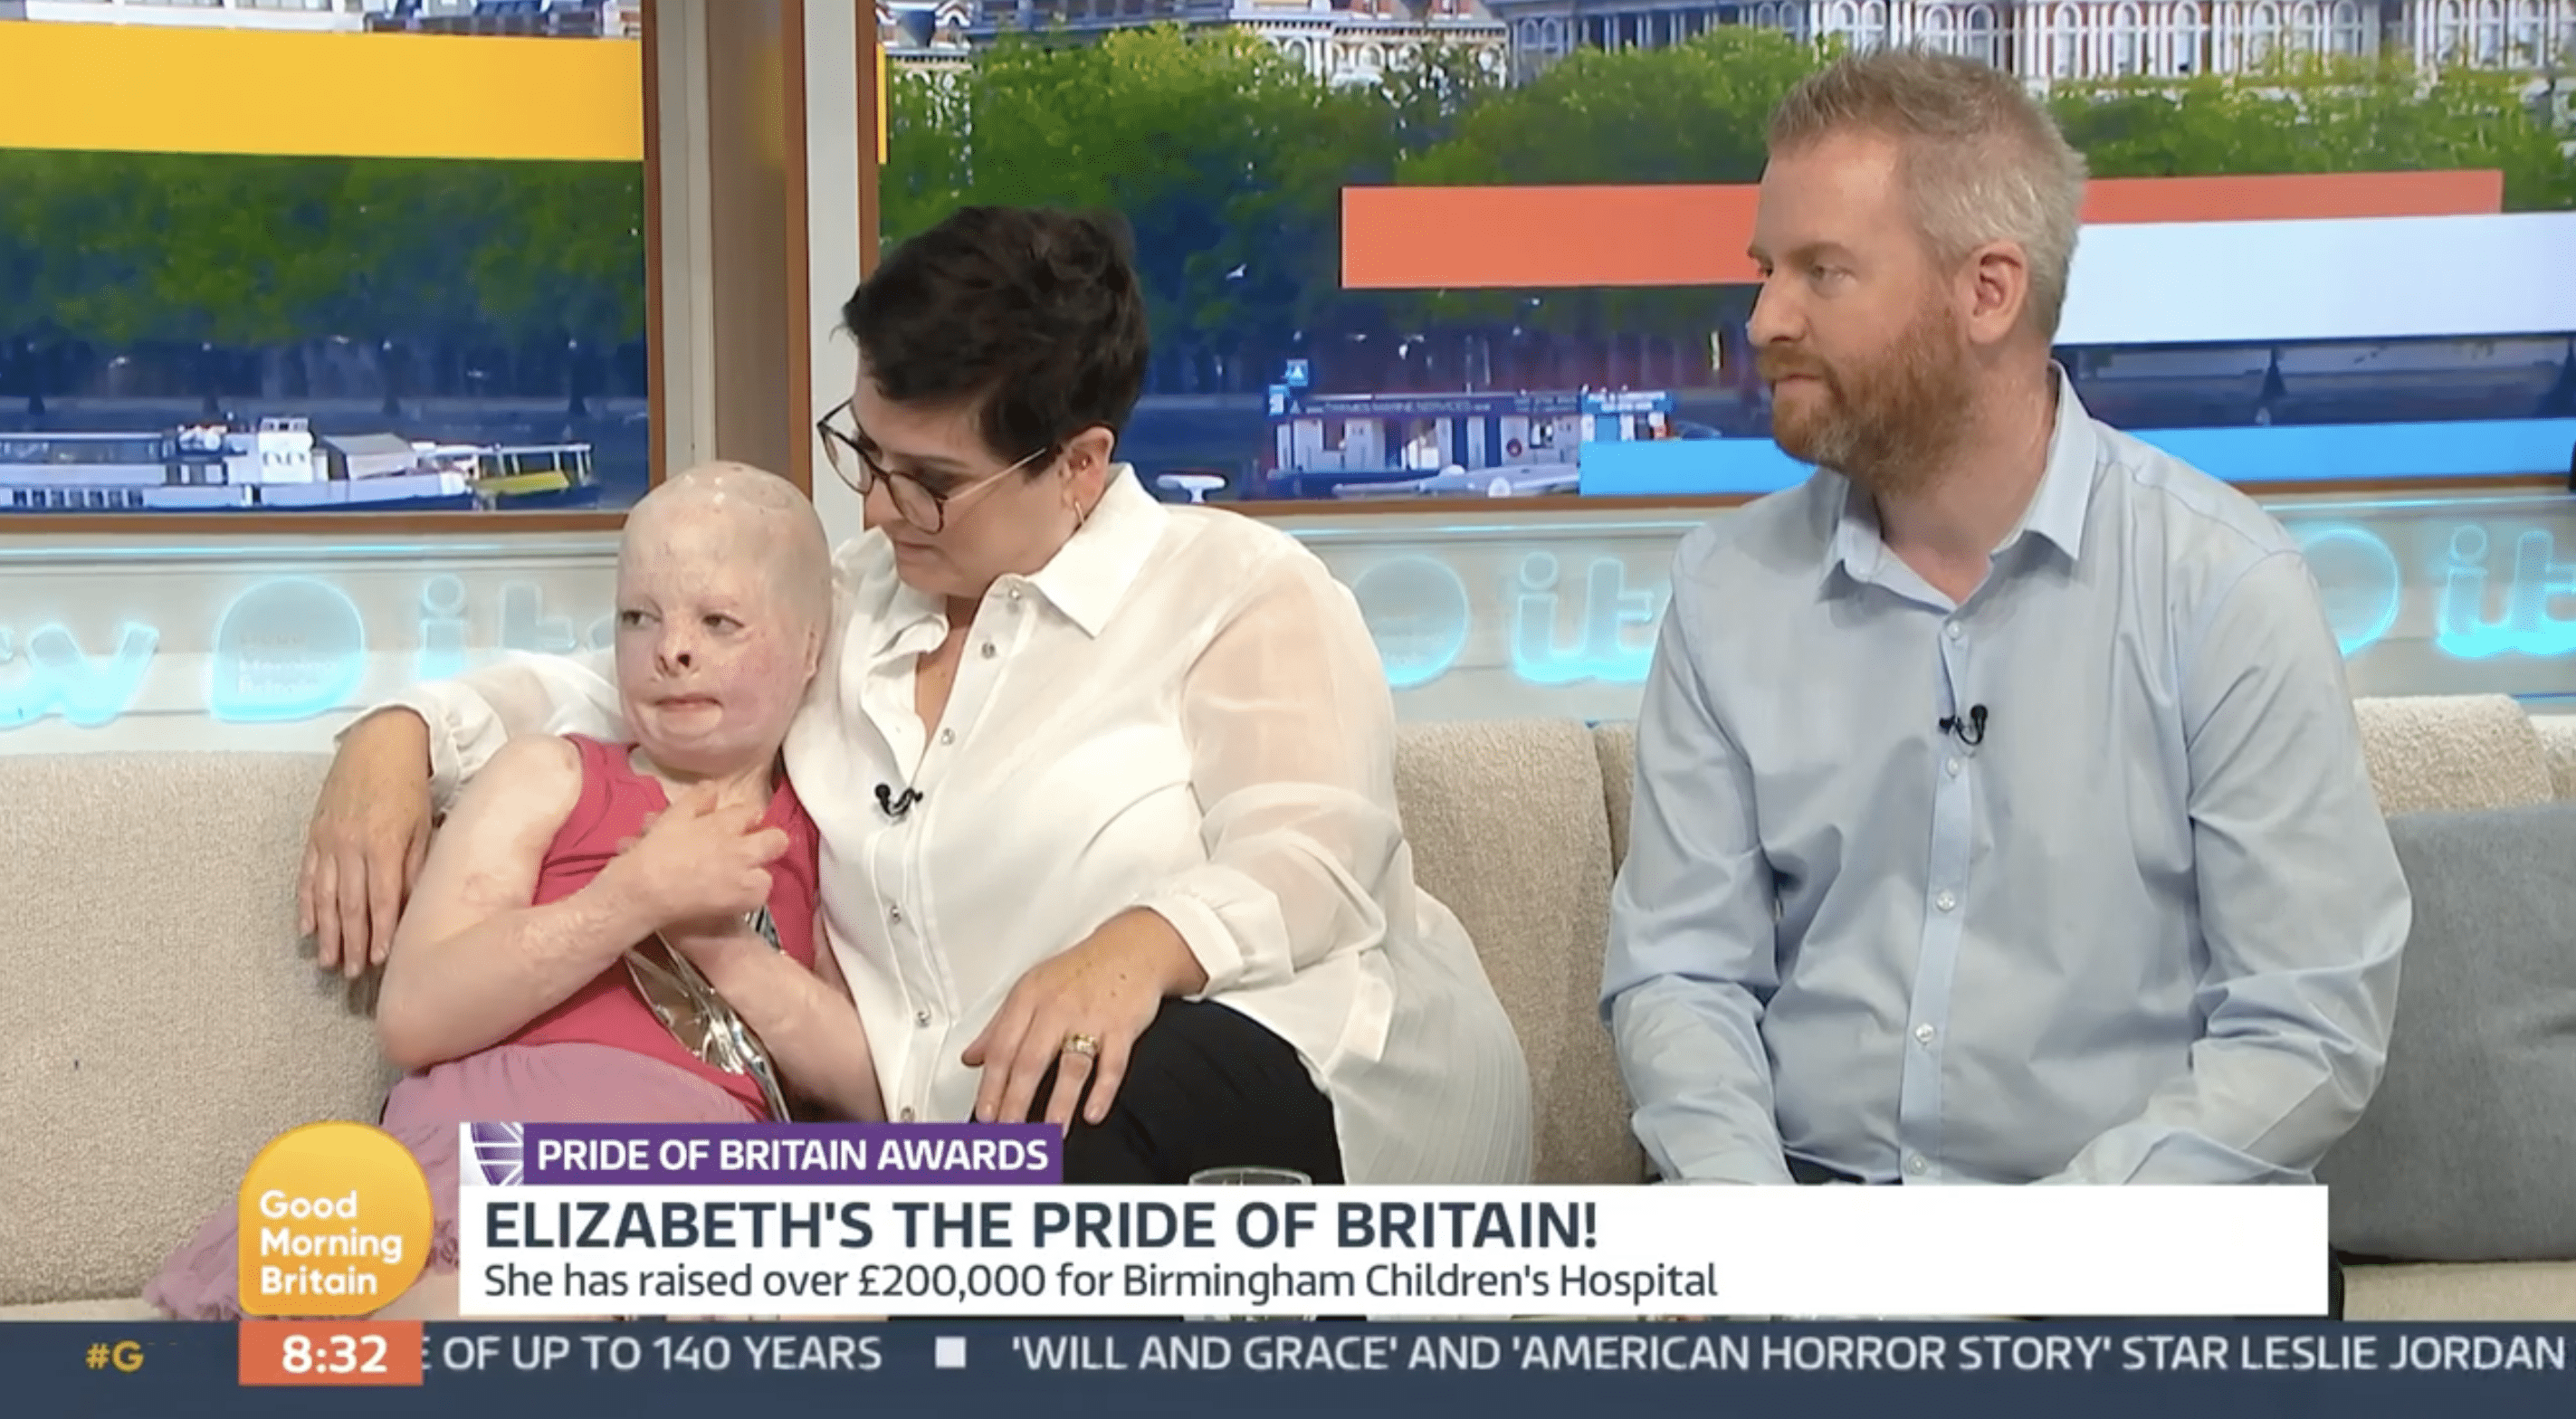 Elizabeth, Sinead, and Liam Soffe on Good Morning Britain. | Source: facebook.com/GMB